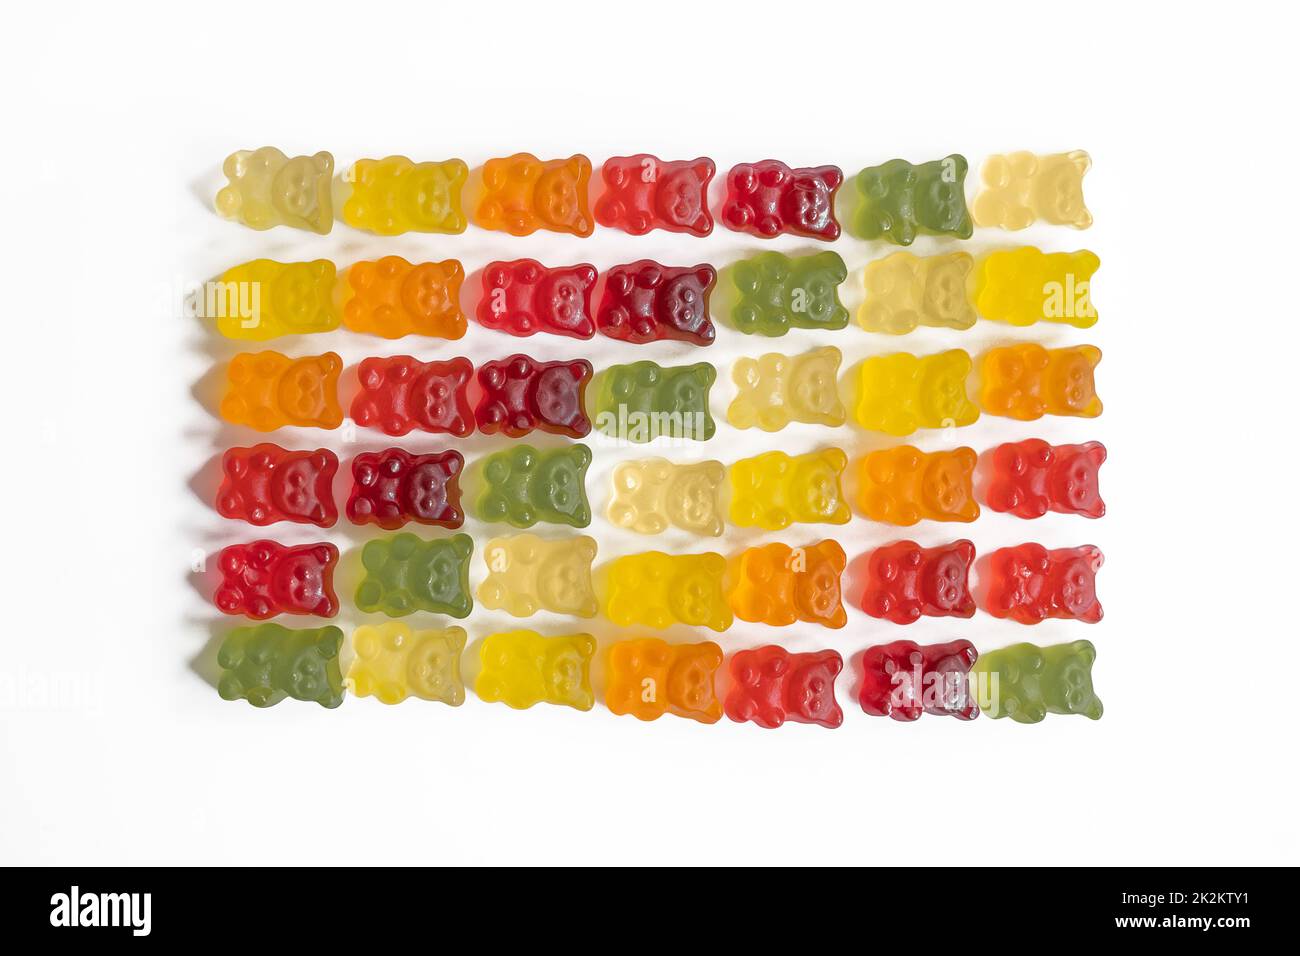 top view of multi-colored gummy bears arranged in rows by color as a gradient on a light background with negative space close-up Stock Photo